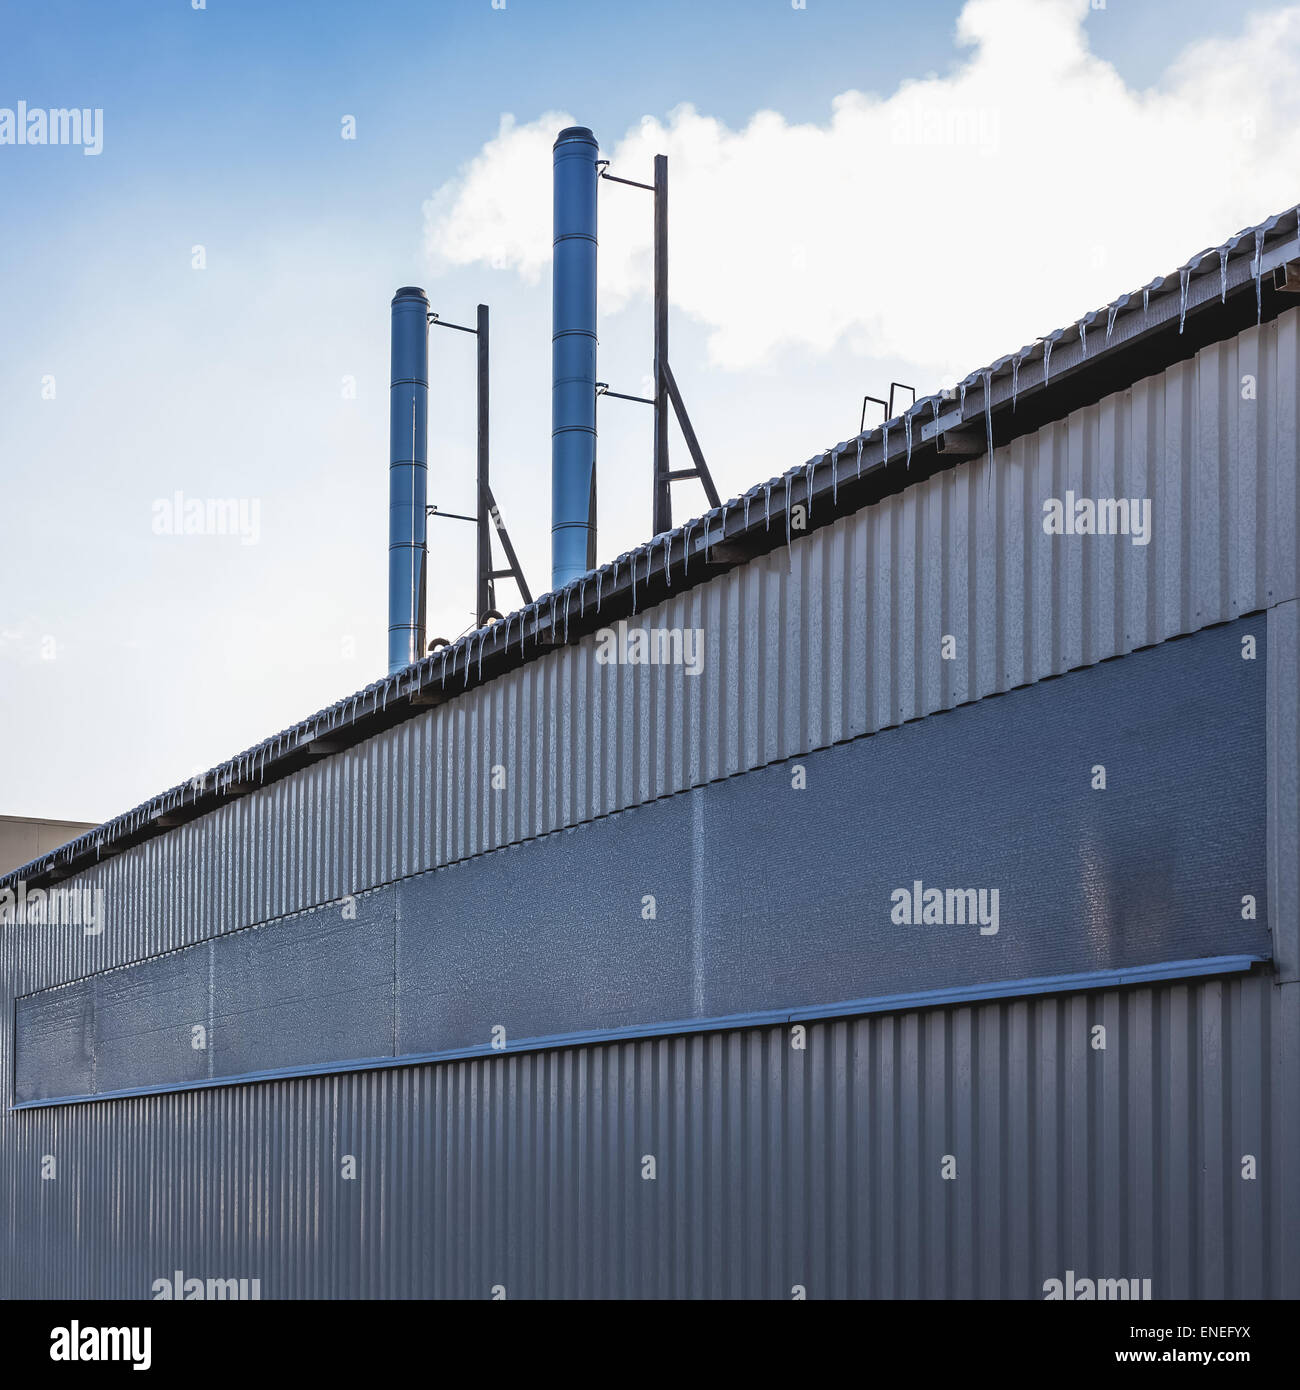 Plastic siding wall of industrial building with smoke pipes Stock Photo